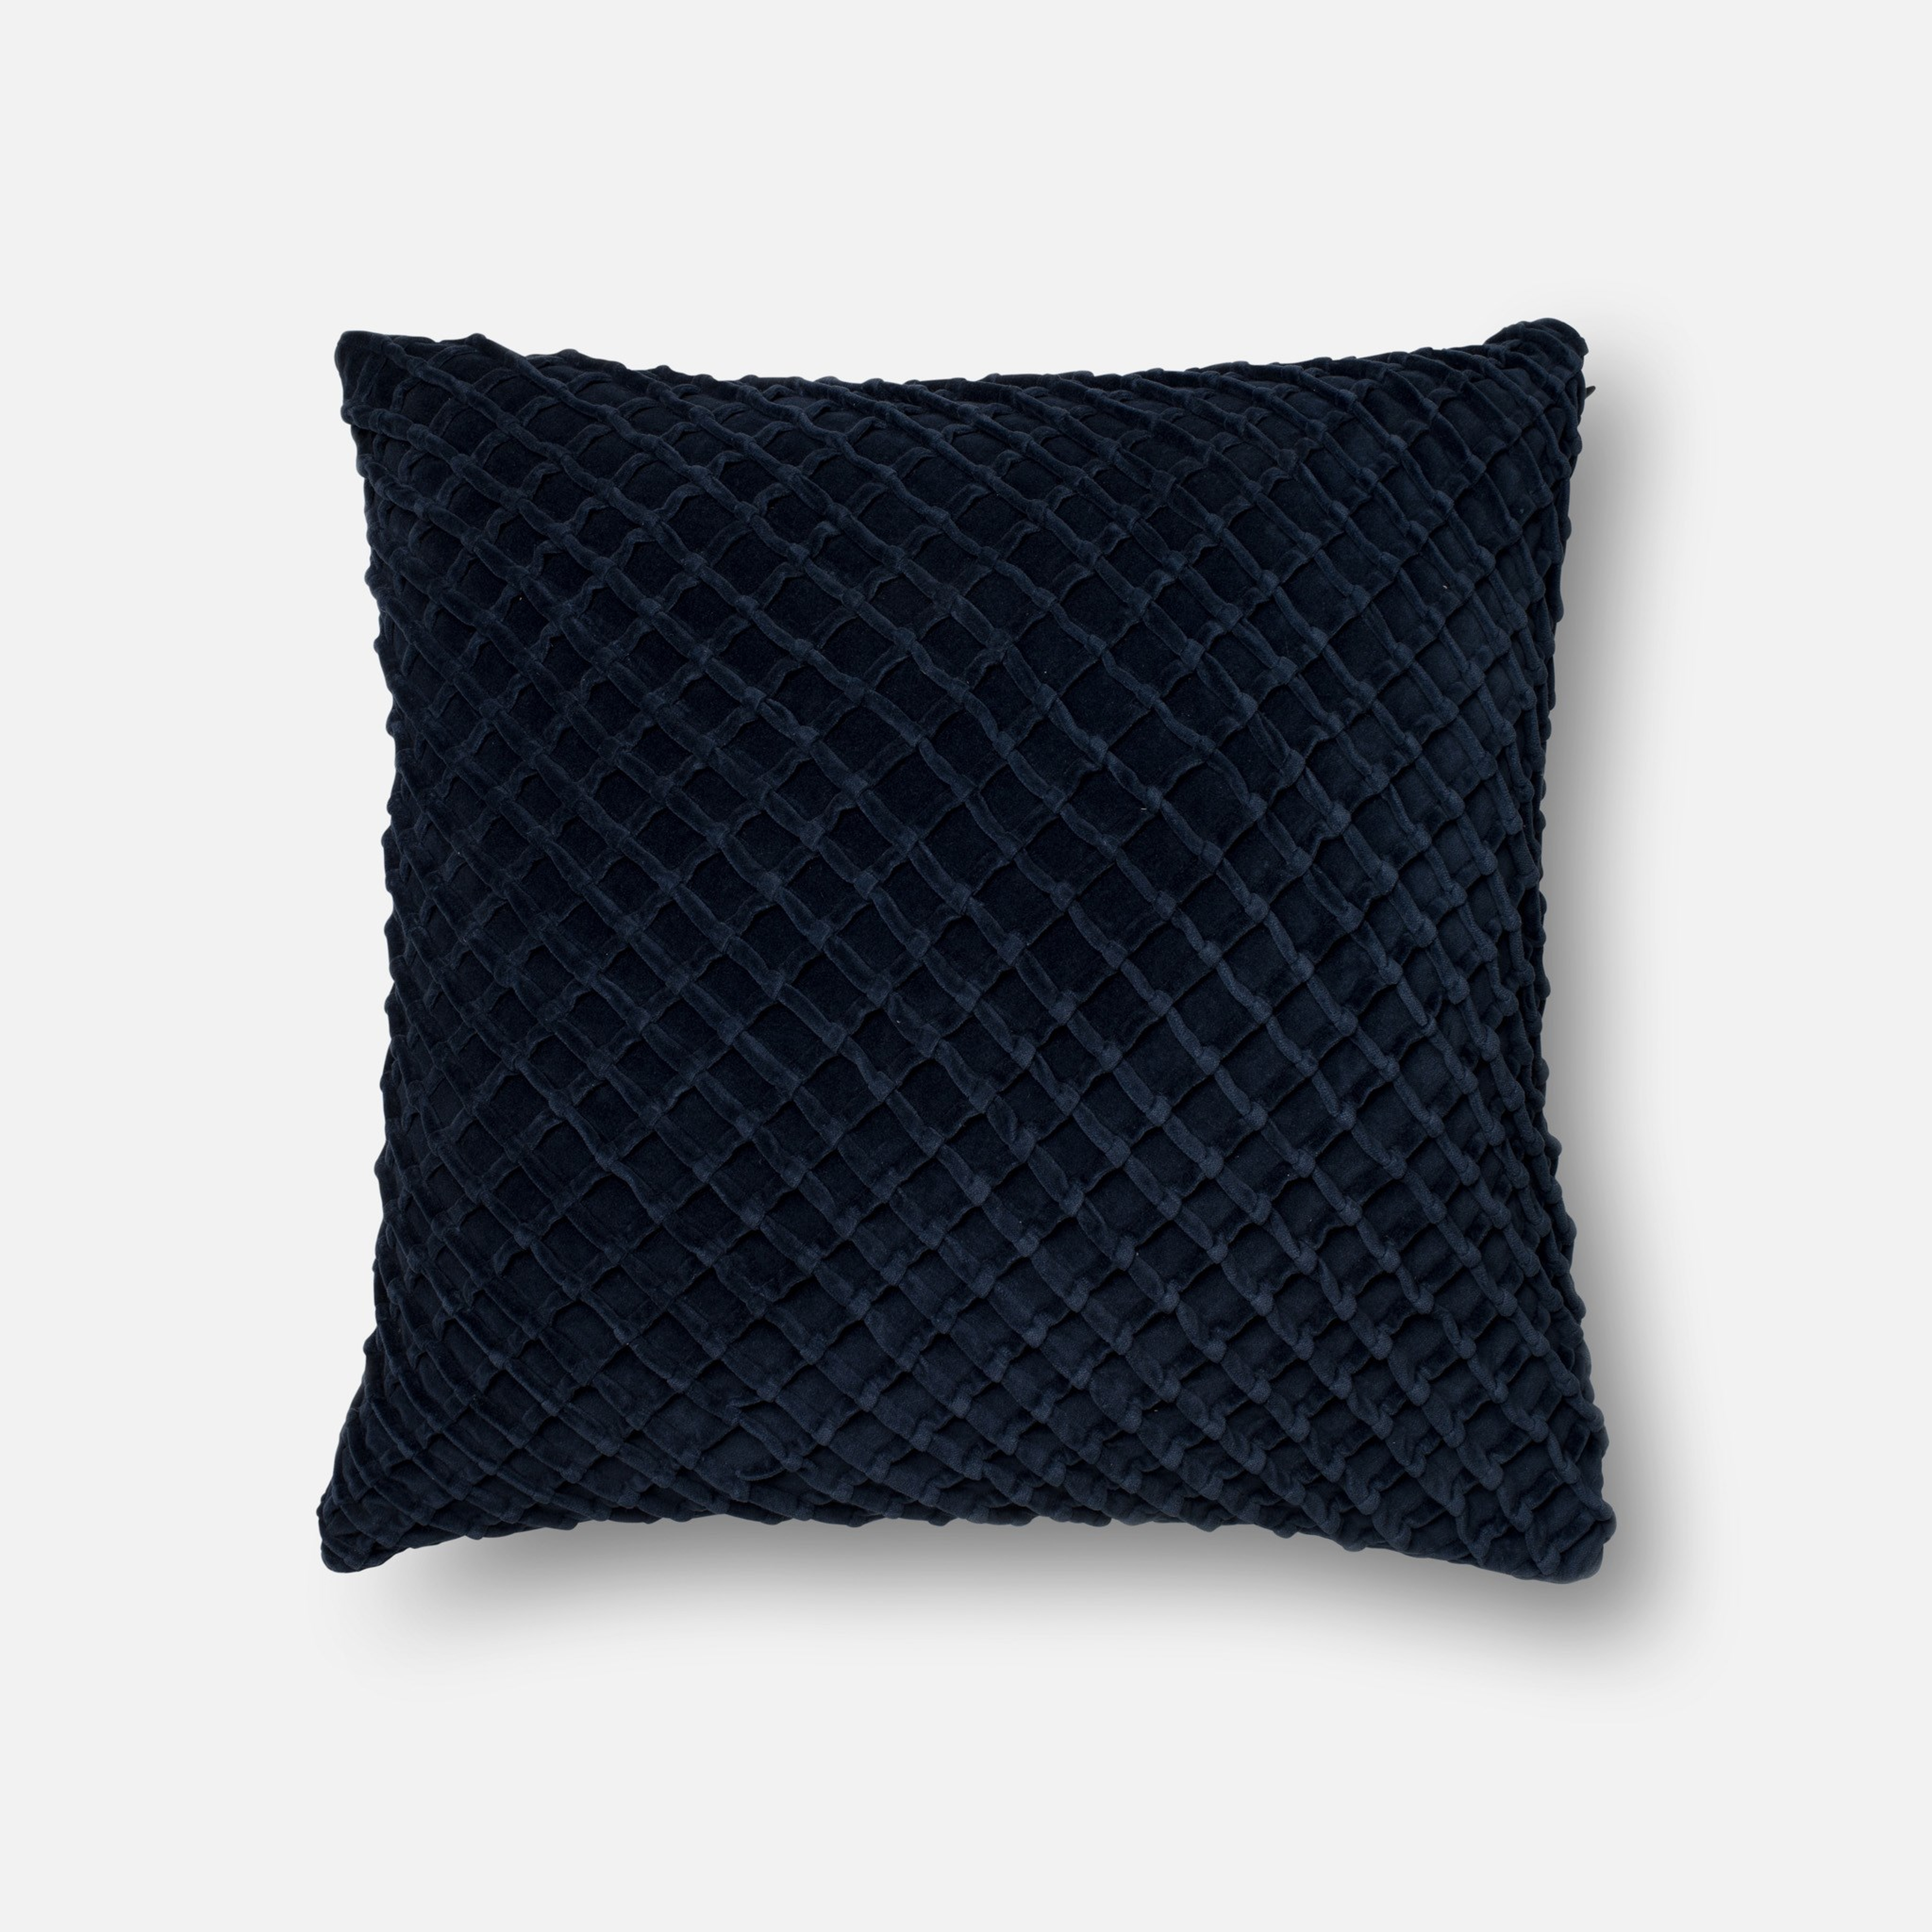 P0125 Navy Pillow - 22x22 - with insert - Loma Threads